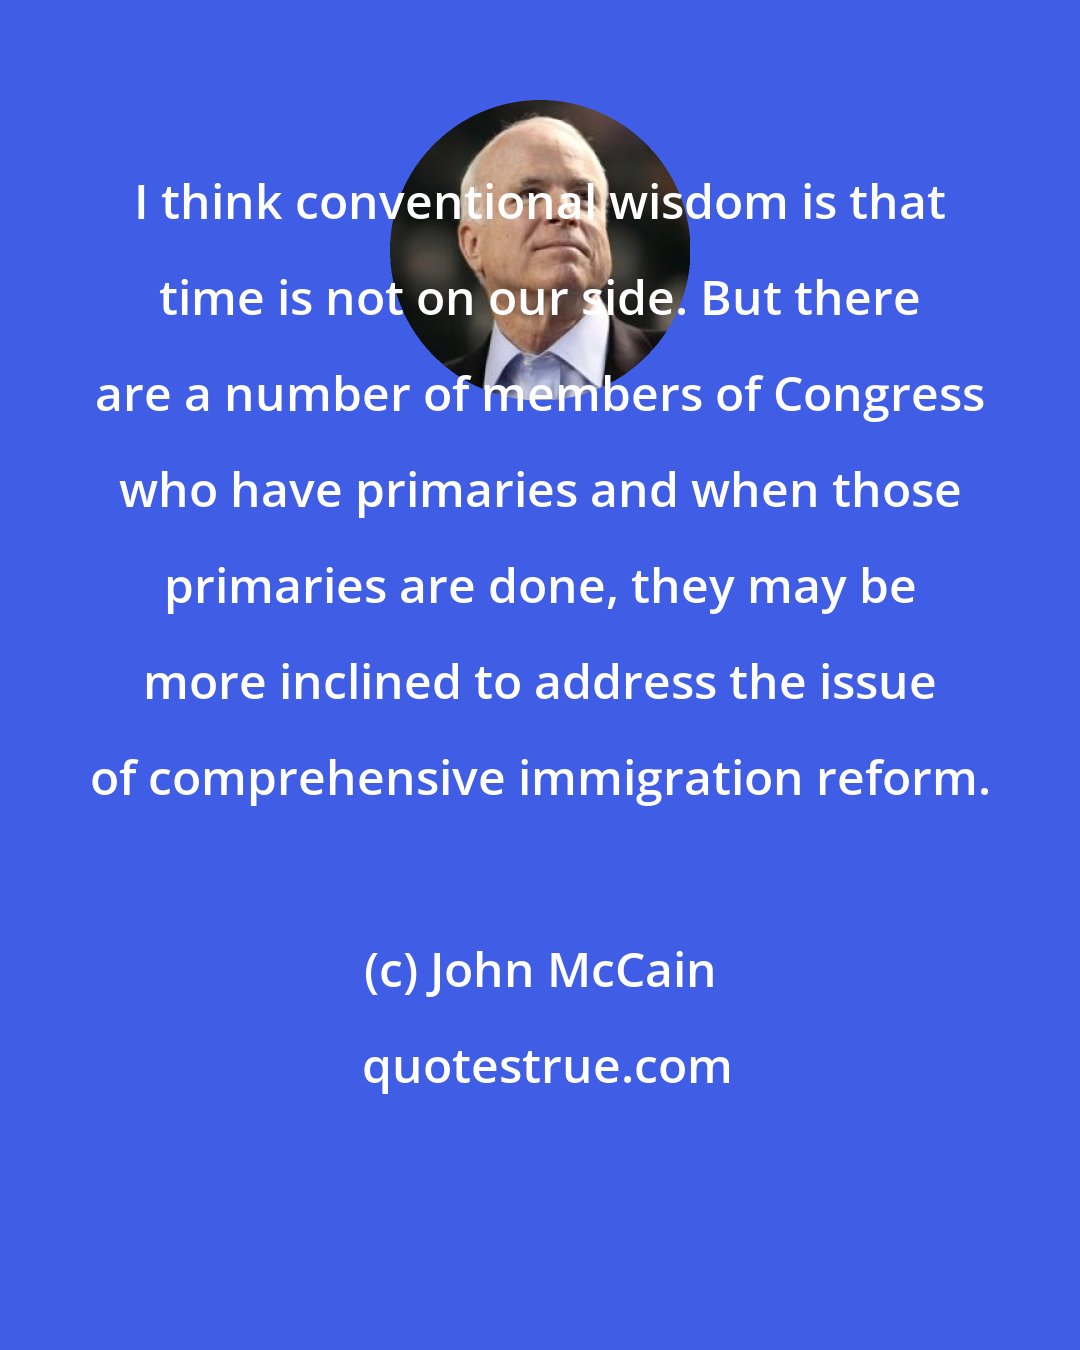 John McCain: I think conventional wisdom is that time is not on our side. But there are a number of members of Congress who have primaries and when those primaries are done, they may be more inclined to address the issue of comprehensive immigration reform.